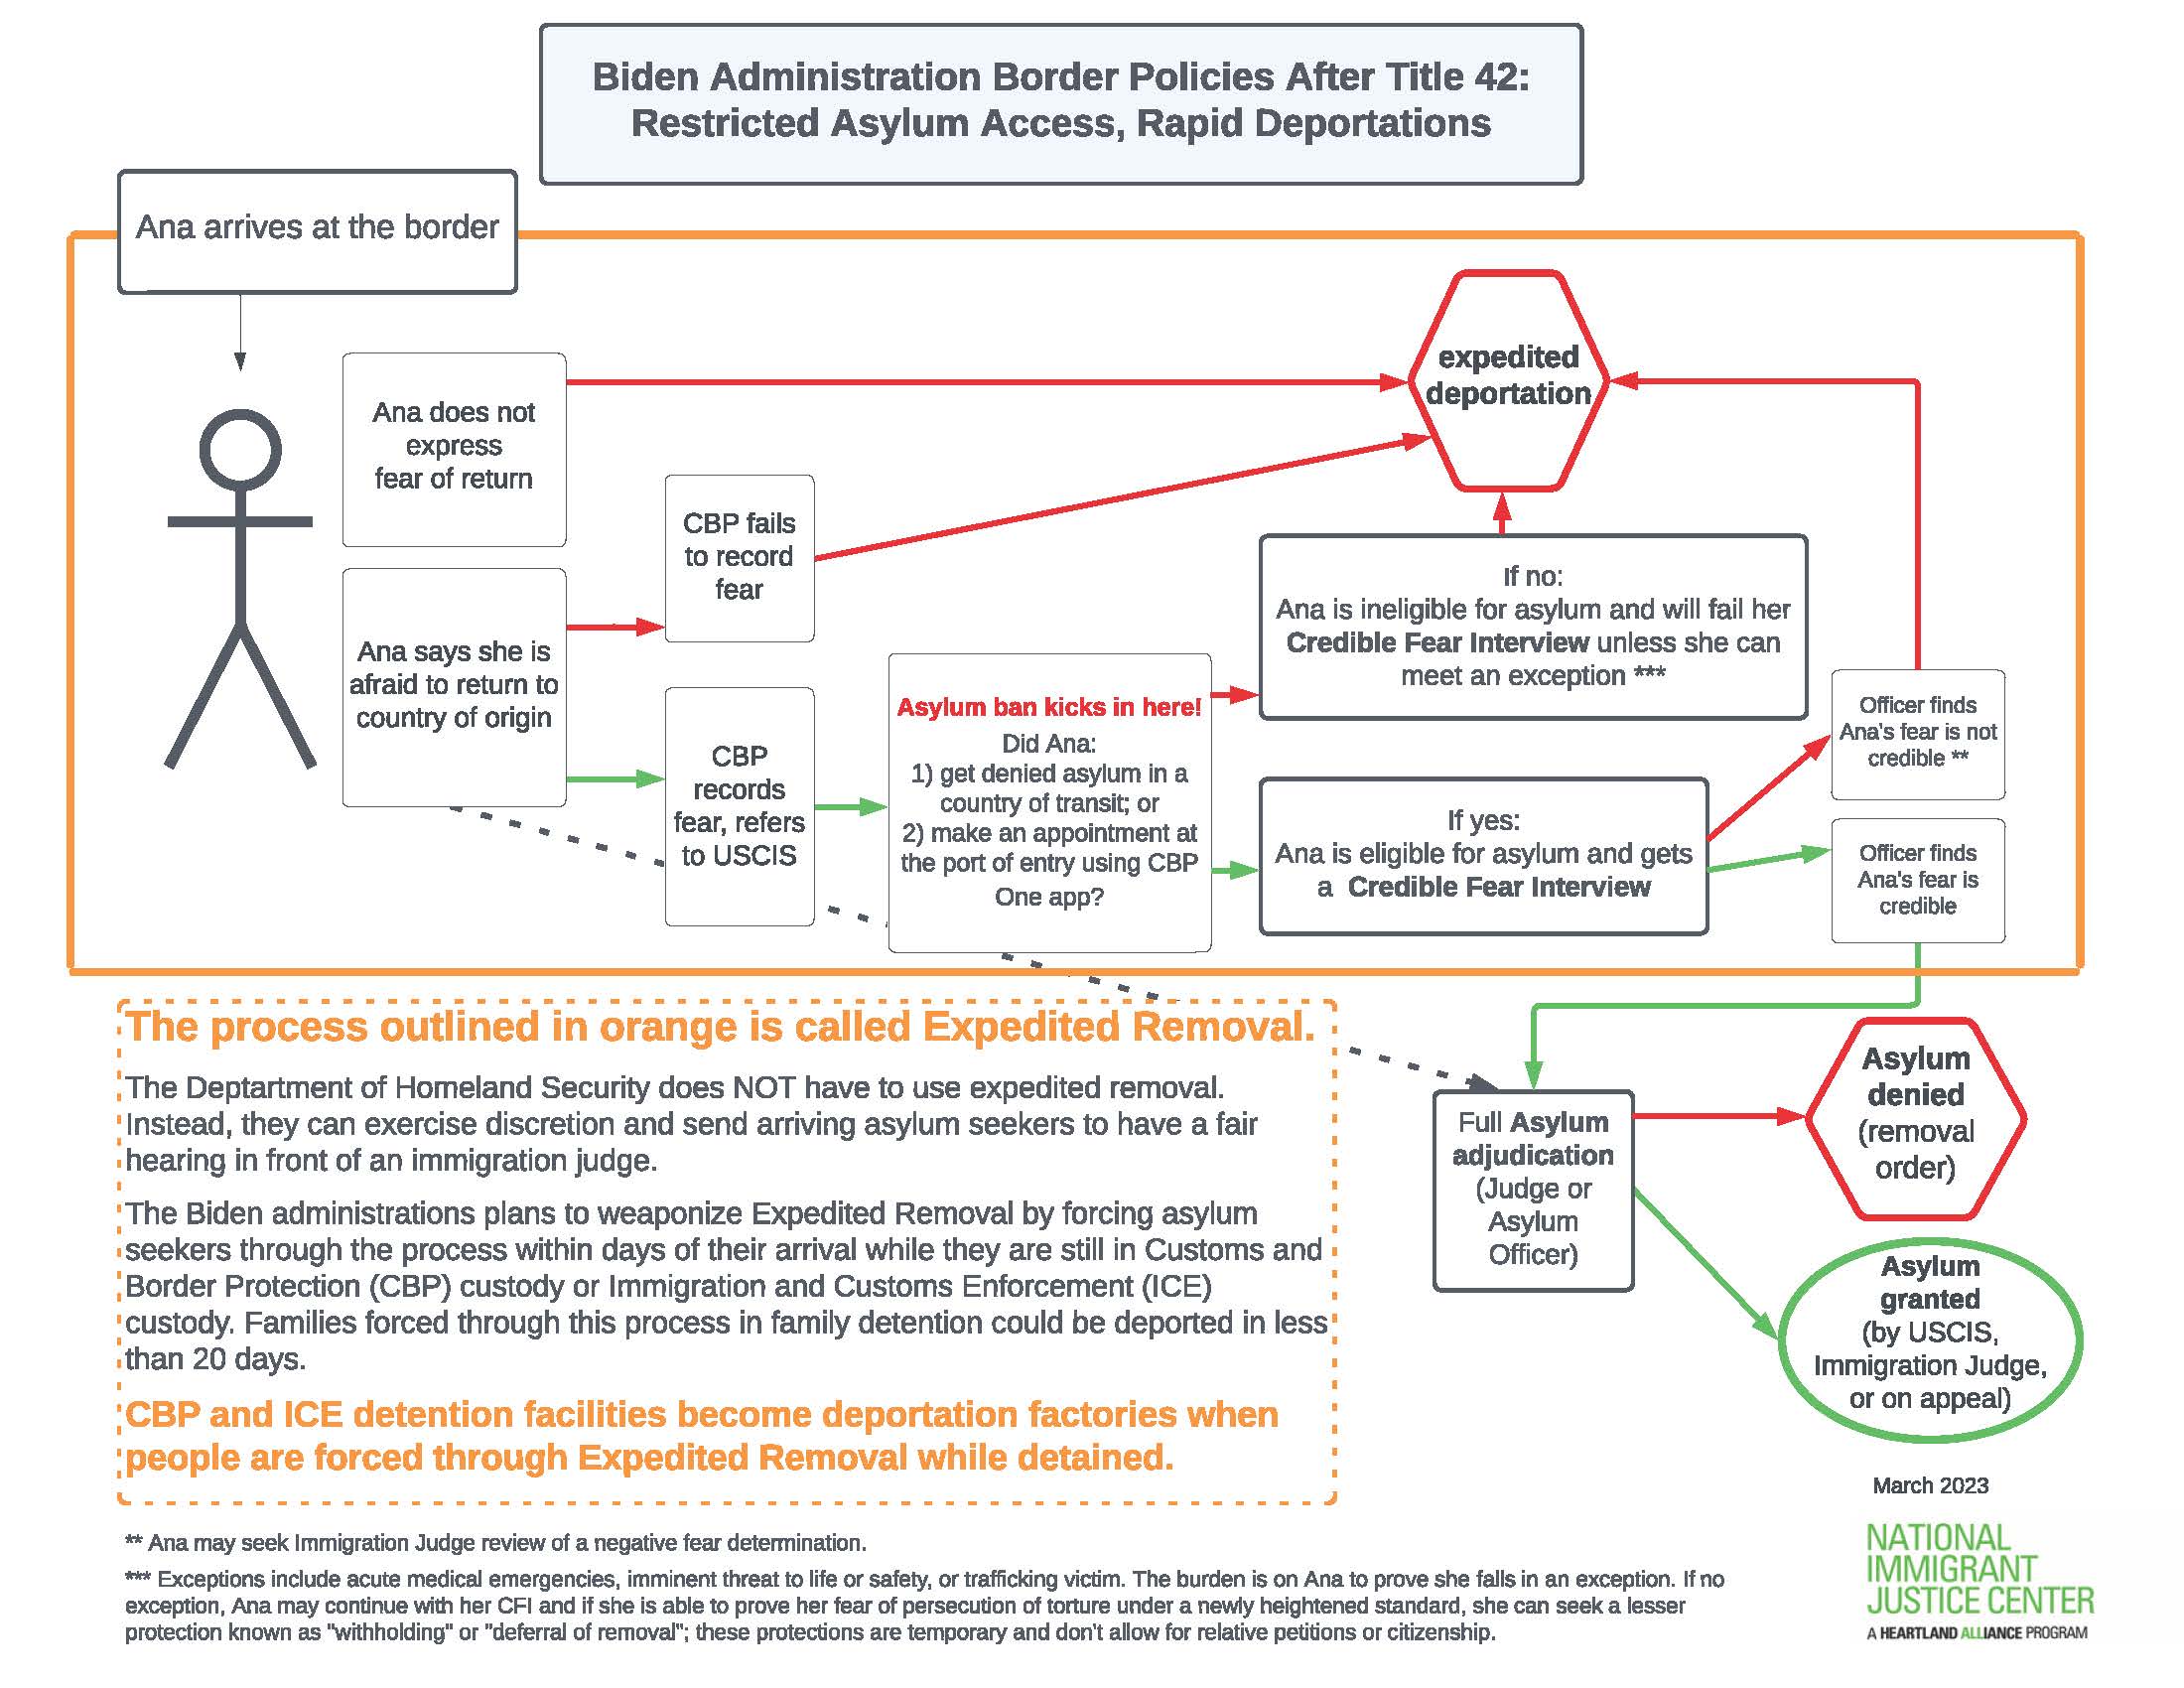 A chart outlining how an asylum seeker arriving at the border must navigate the complicated expedited removal process and asylum ban. Most routes lead towards rapid deportation.